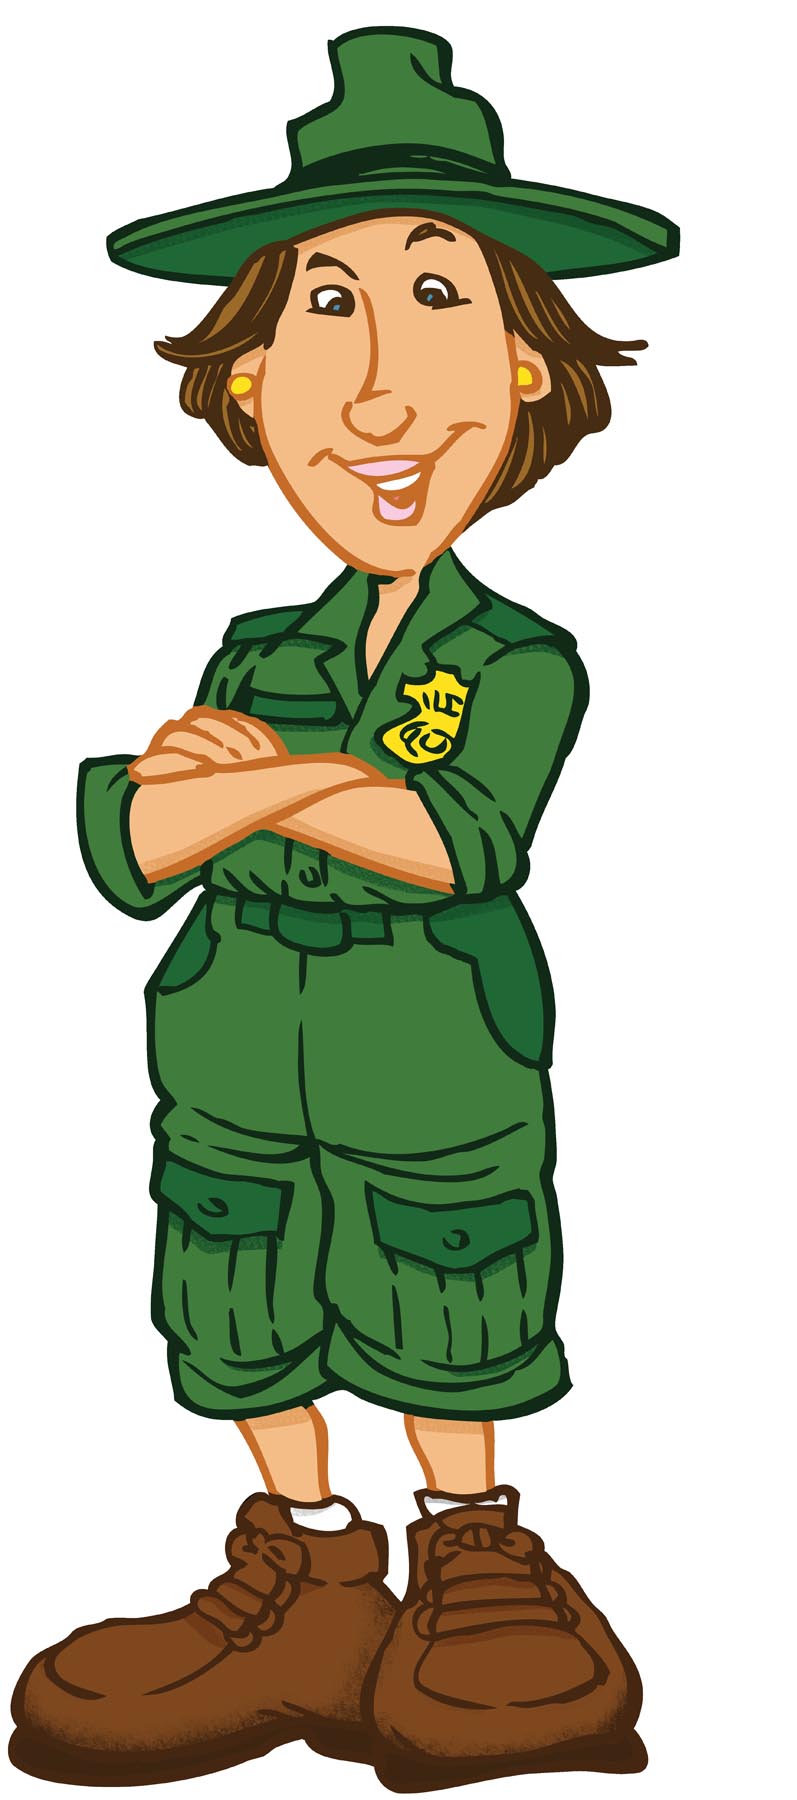 zoologist clipart - photo #26